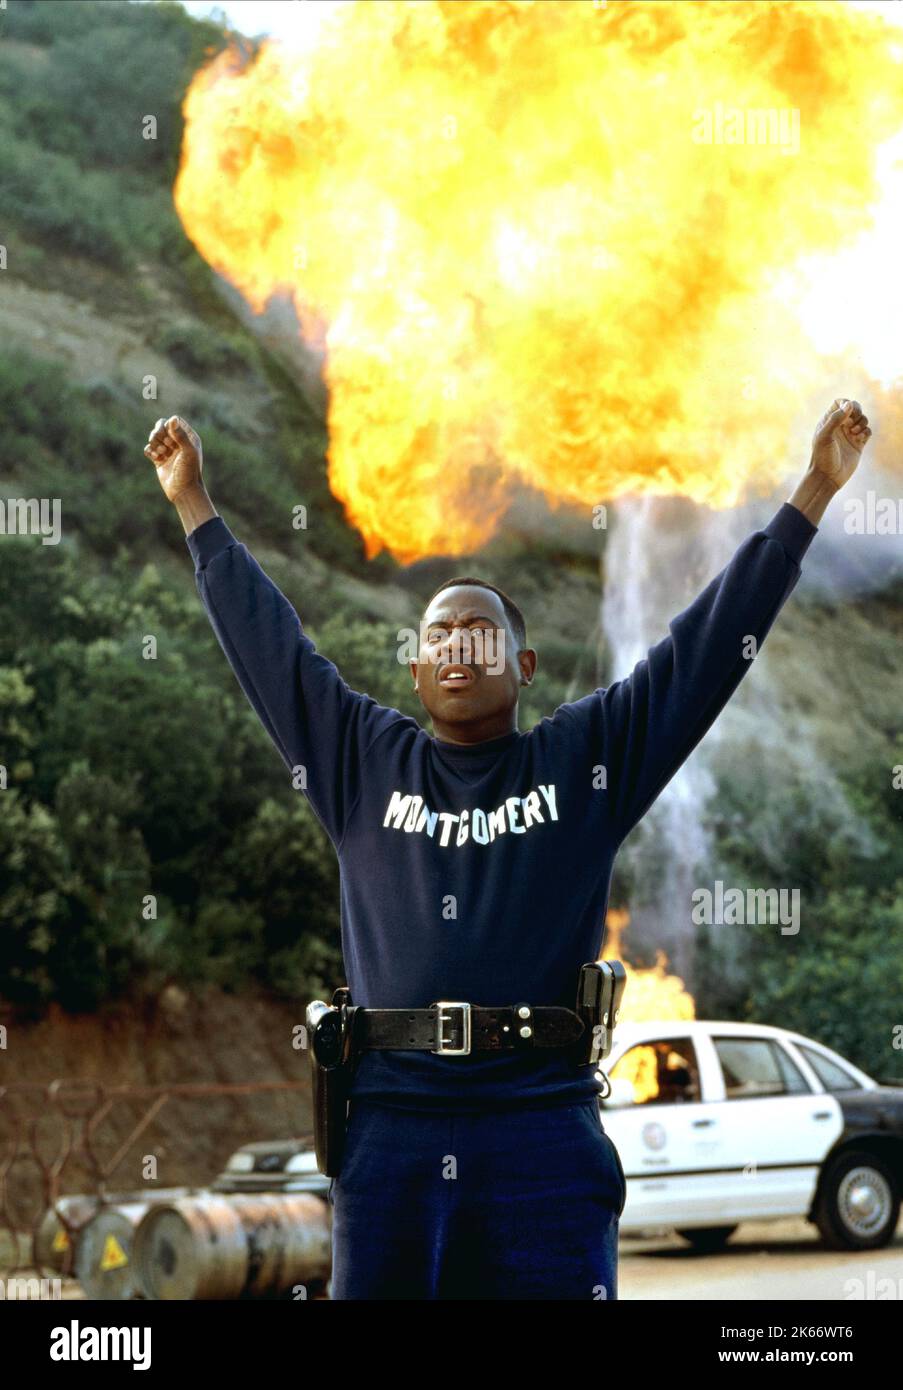 MARTIN LAWRENCE, NATIONAL SECURITY, 2003 Stock Photo